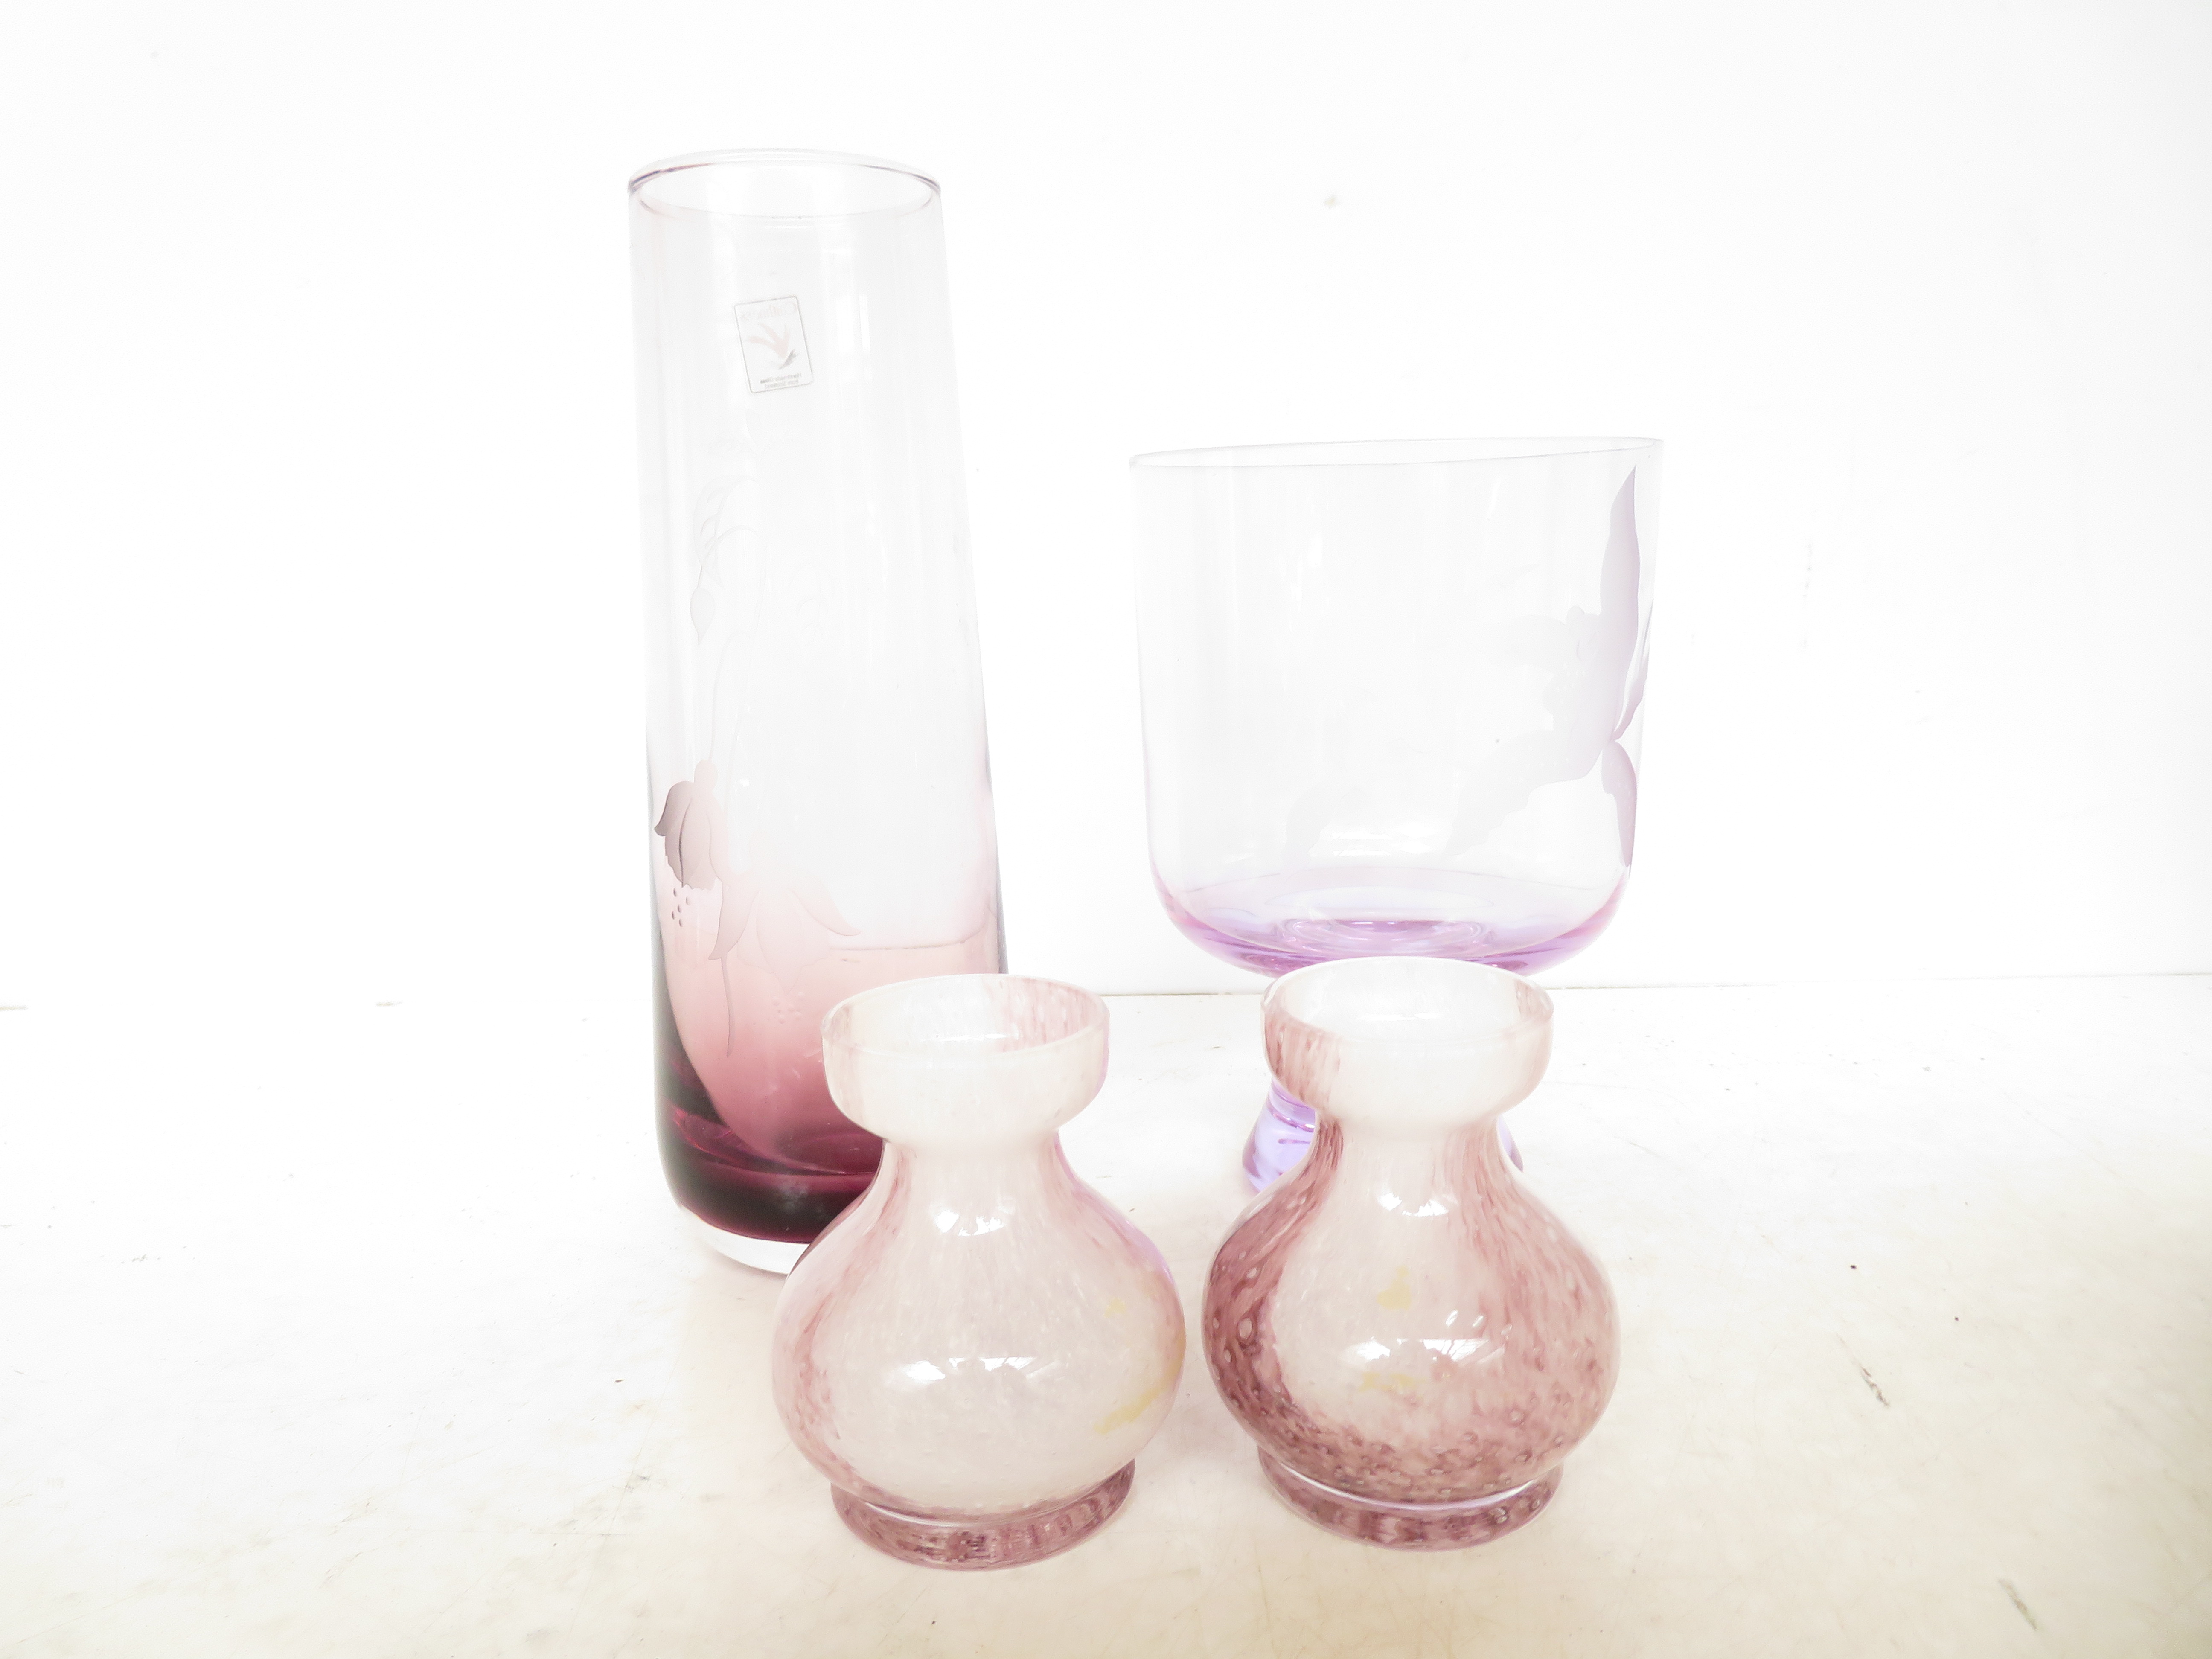 Caithness glass (2 vases & 2 candle holders)